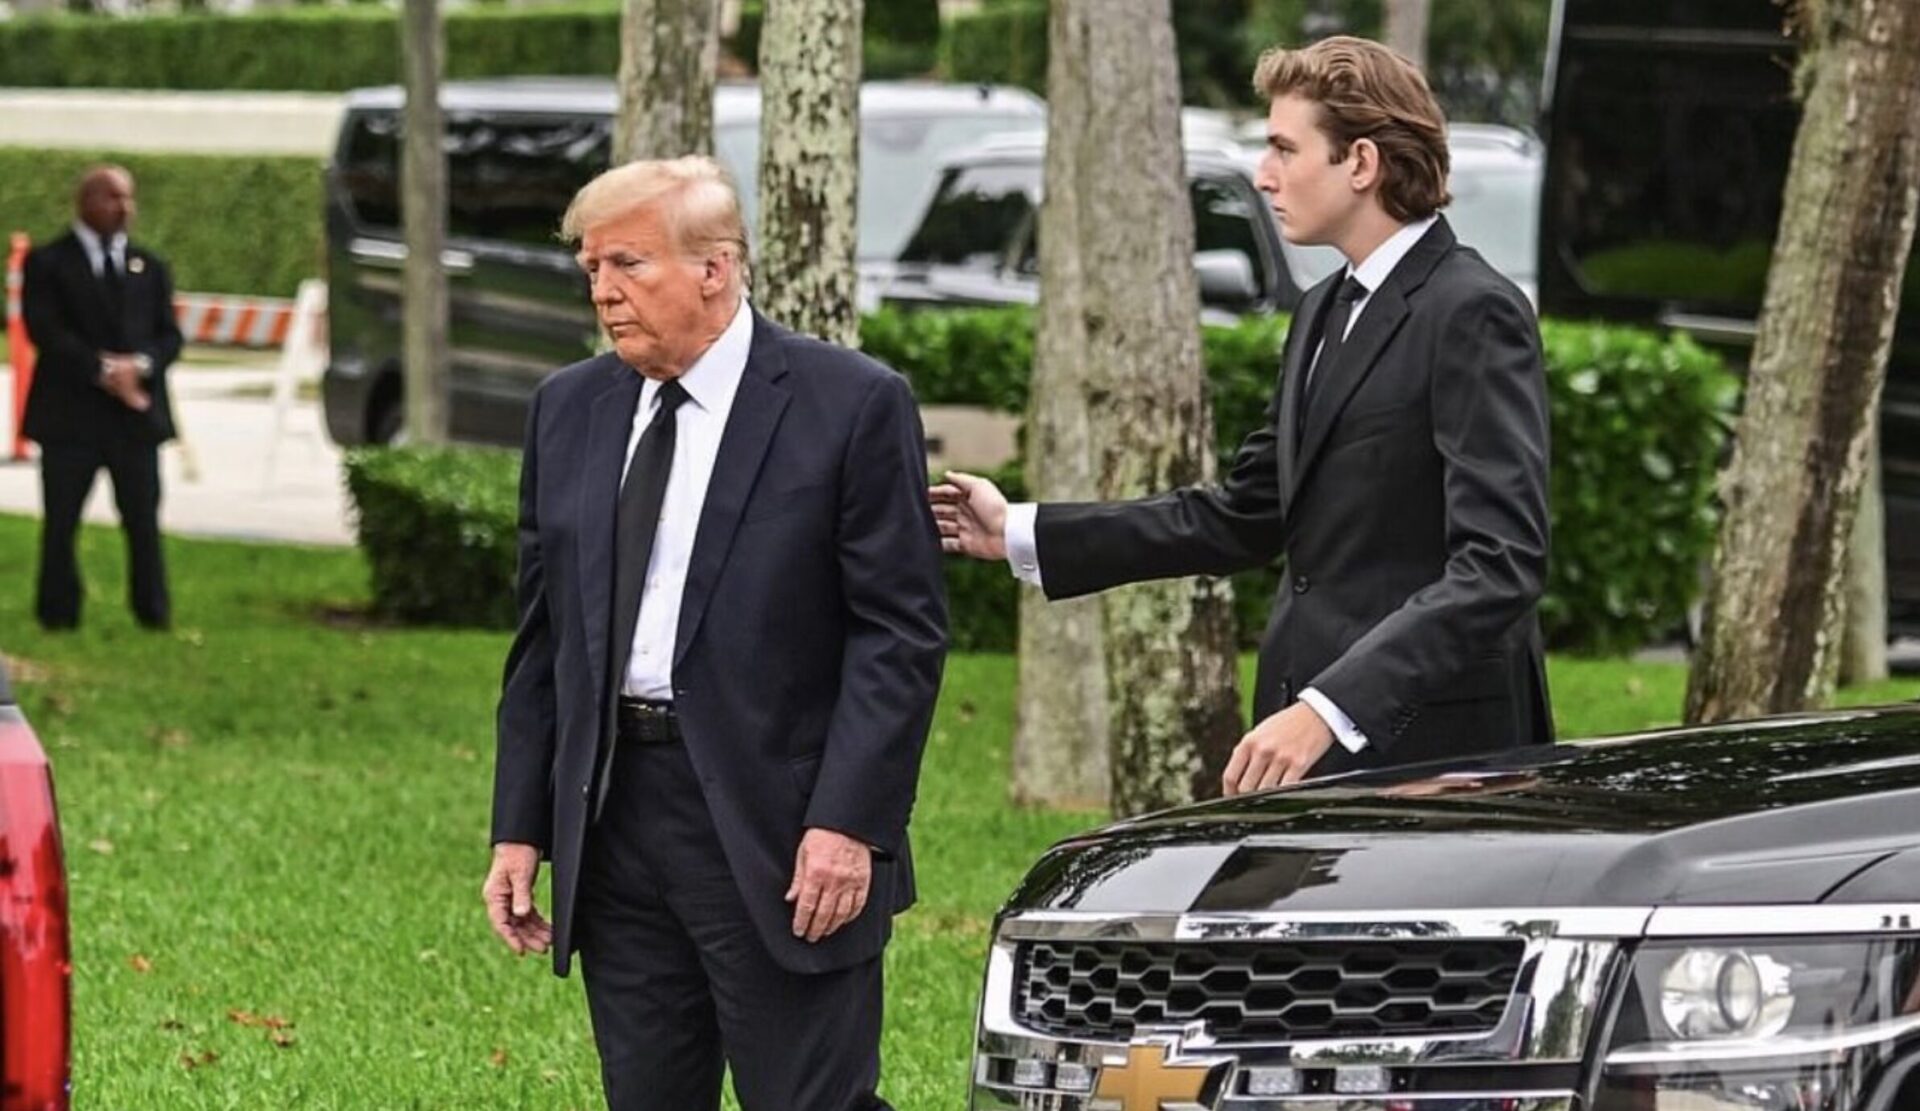 Trump's Real Height Comes Back to Haunt Him After Photo With Barron